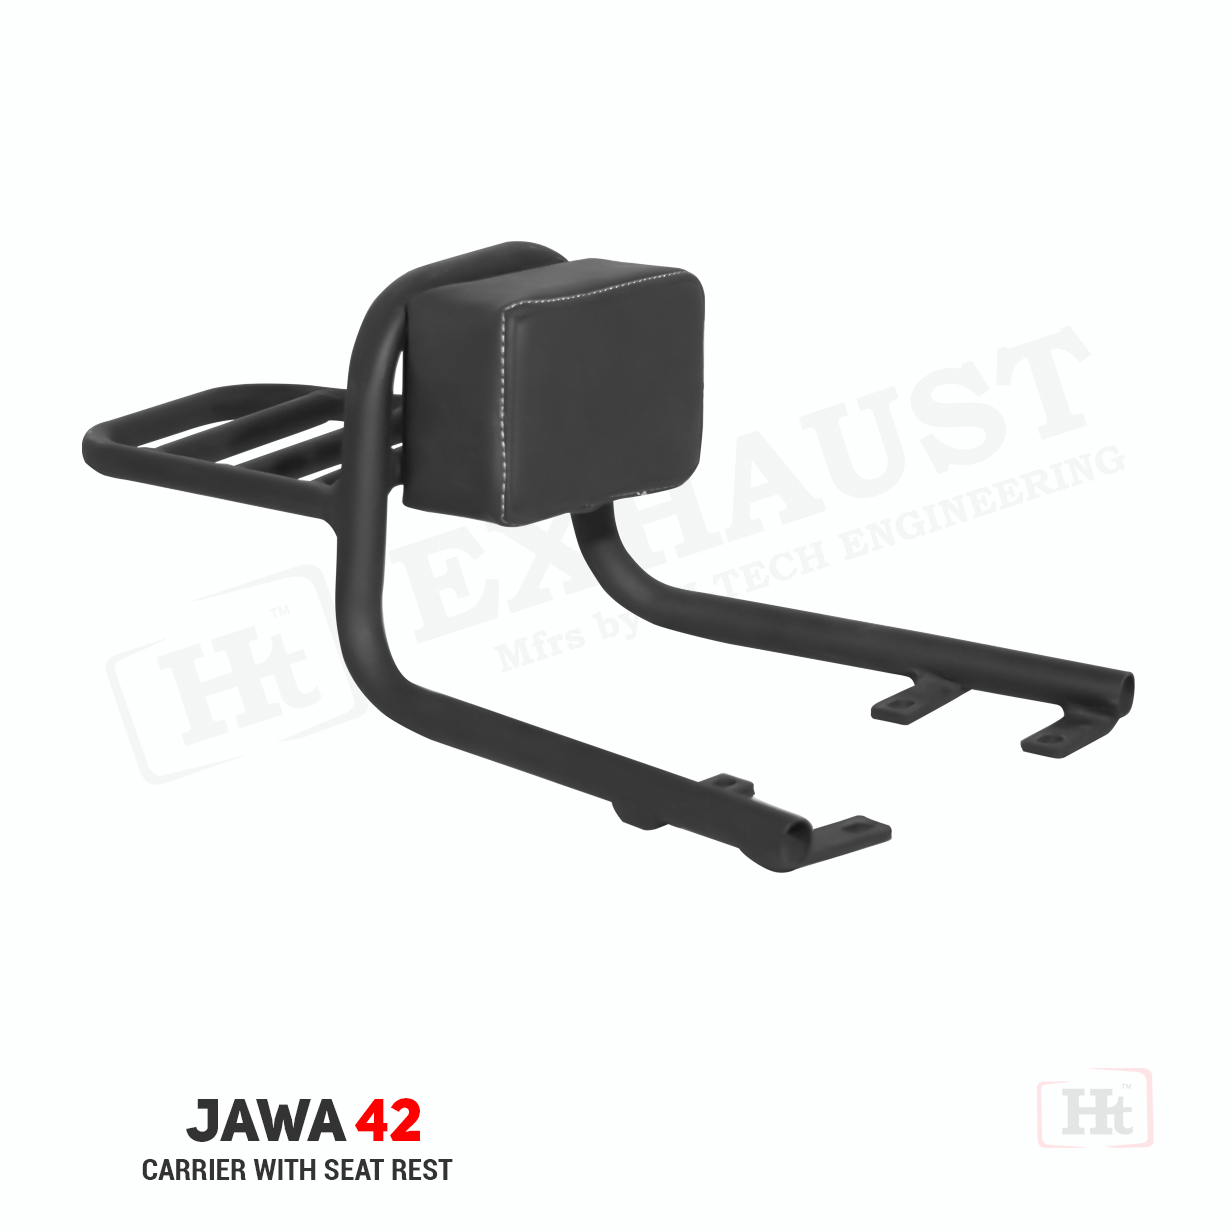 JAWA 42 & Roadster 350 FOR SILENCER BEND PIPE TWO SIDE - Ht Exhaust BS6 -  JW 411 - Ht Exhaust